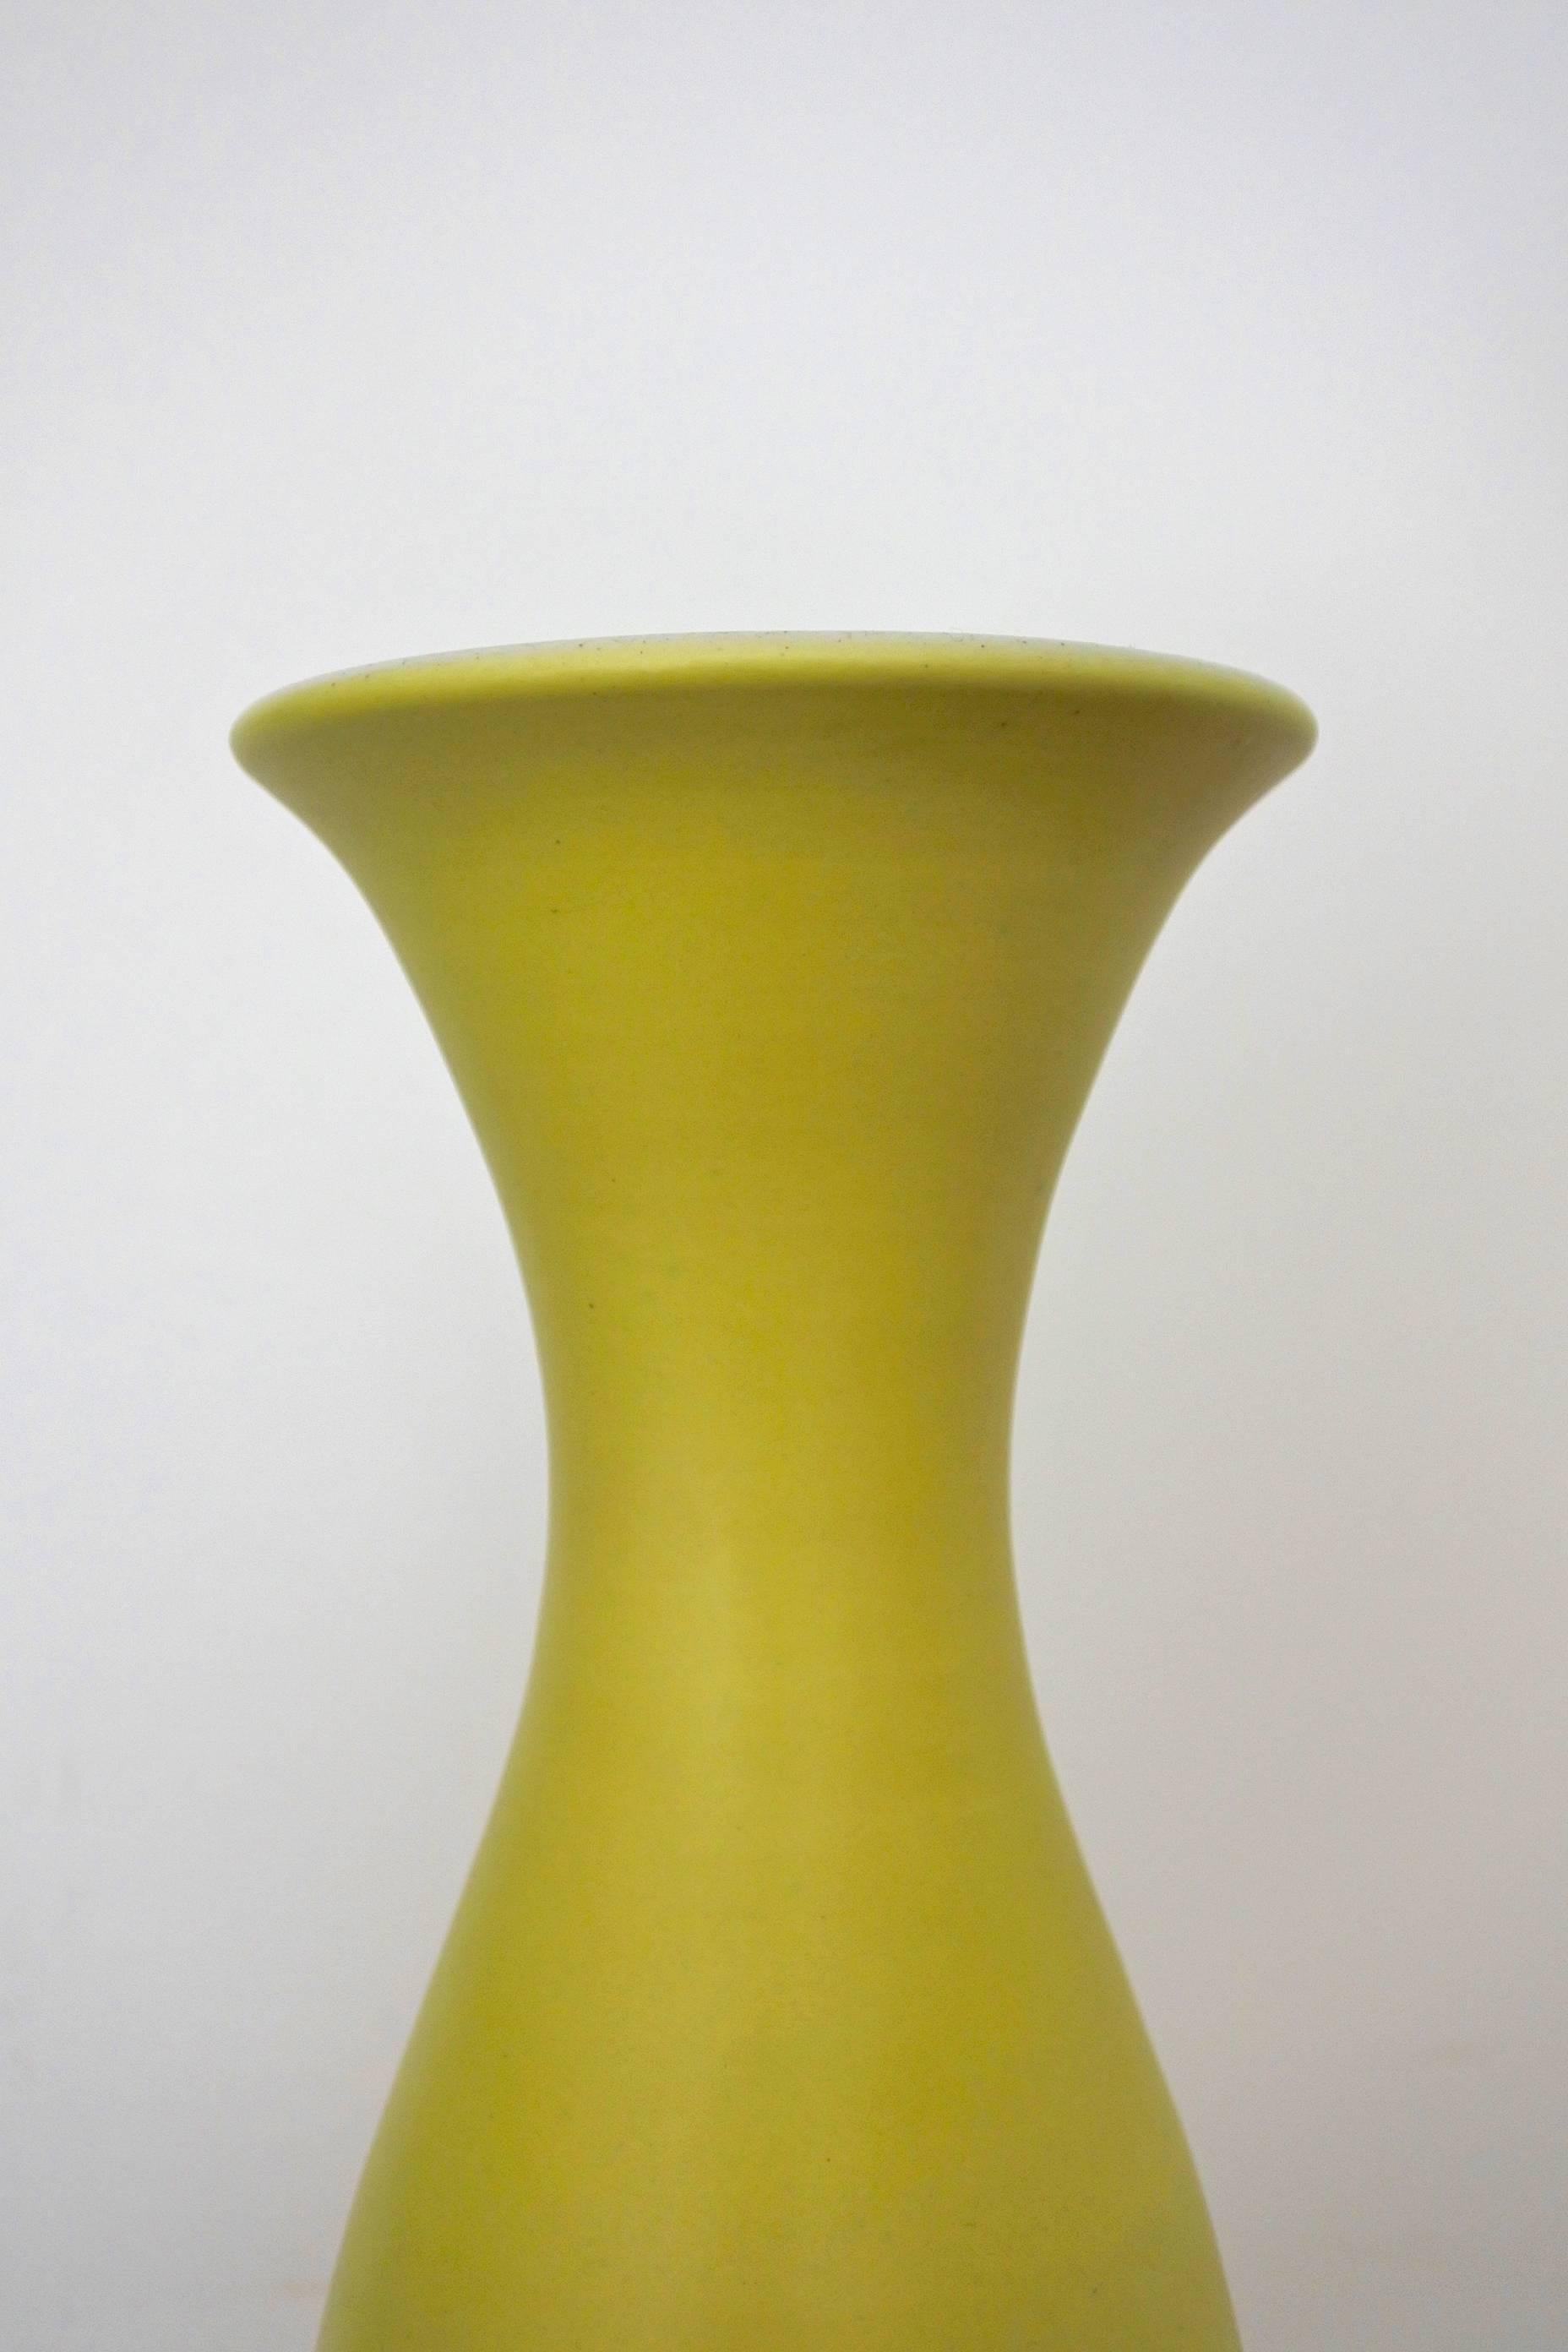 Midcentury ceramic vase by renowned French pottery artist Pol Chambost.
Signed Pol Chambost Made in France 1069
Pastel yellow satin glaze on the outside, satin white glaze on the inside.
Documented in the book Pol Chambost, sculpteur céramiste,